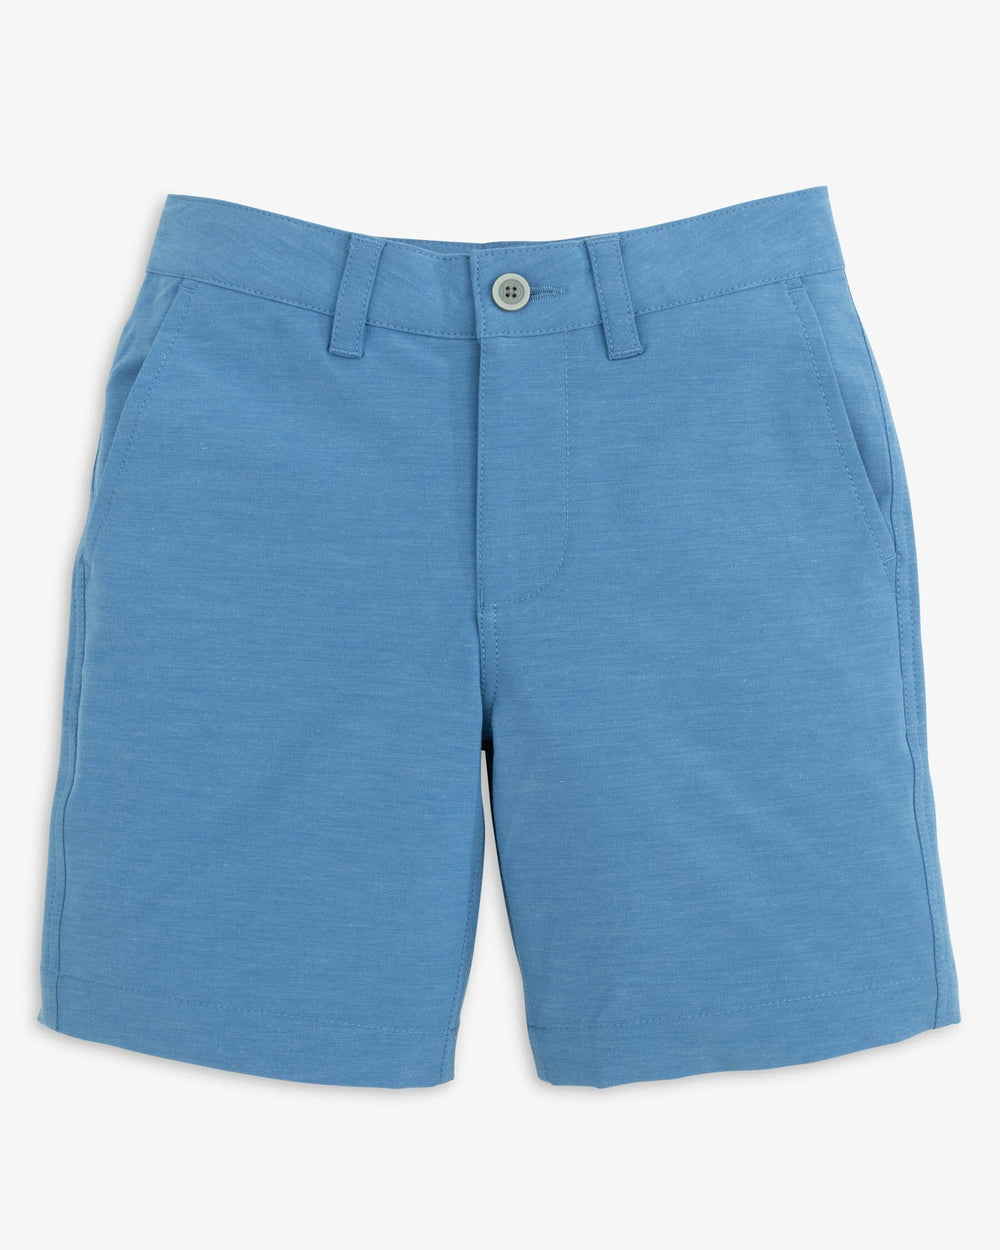 The front view of the Southern Tide Boys Heathered T3 Gulf Short by Southern Tide - Heather Atlantic Blue